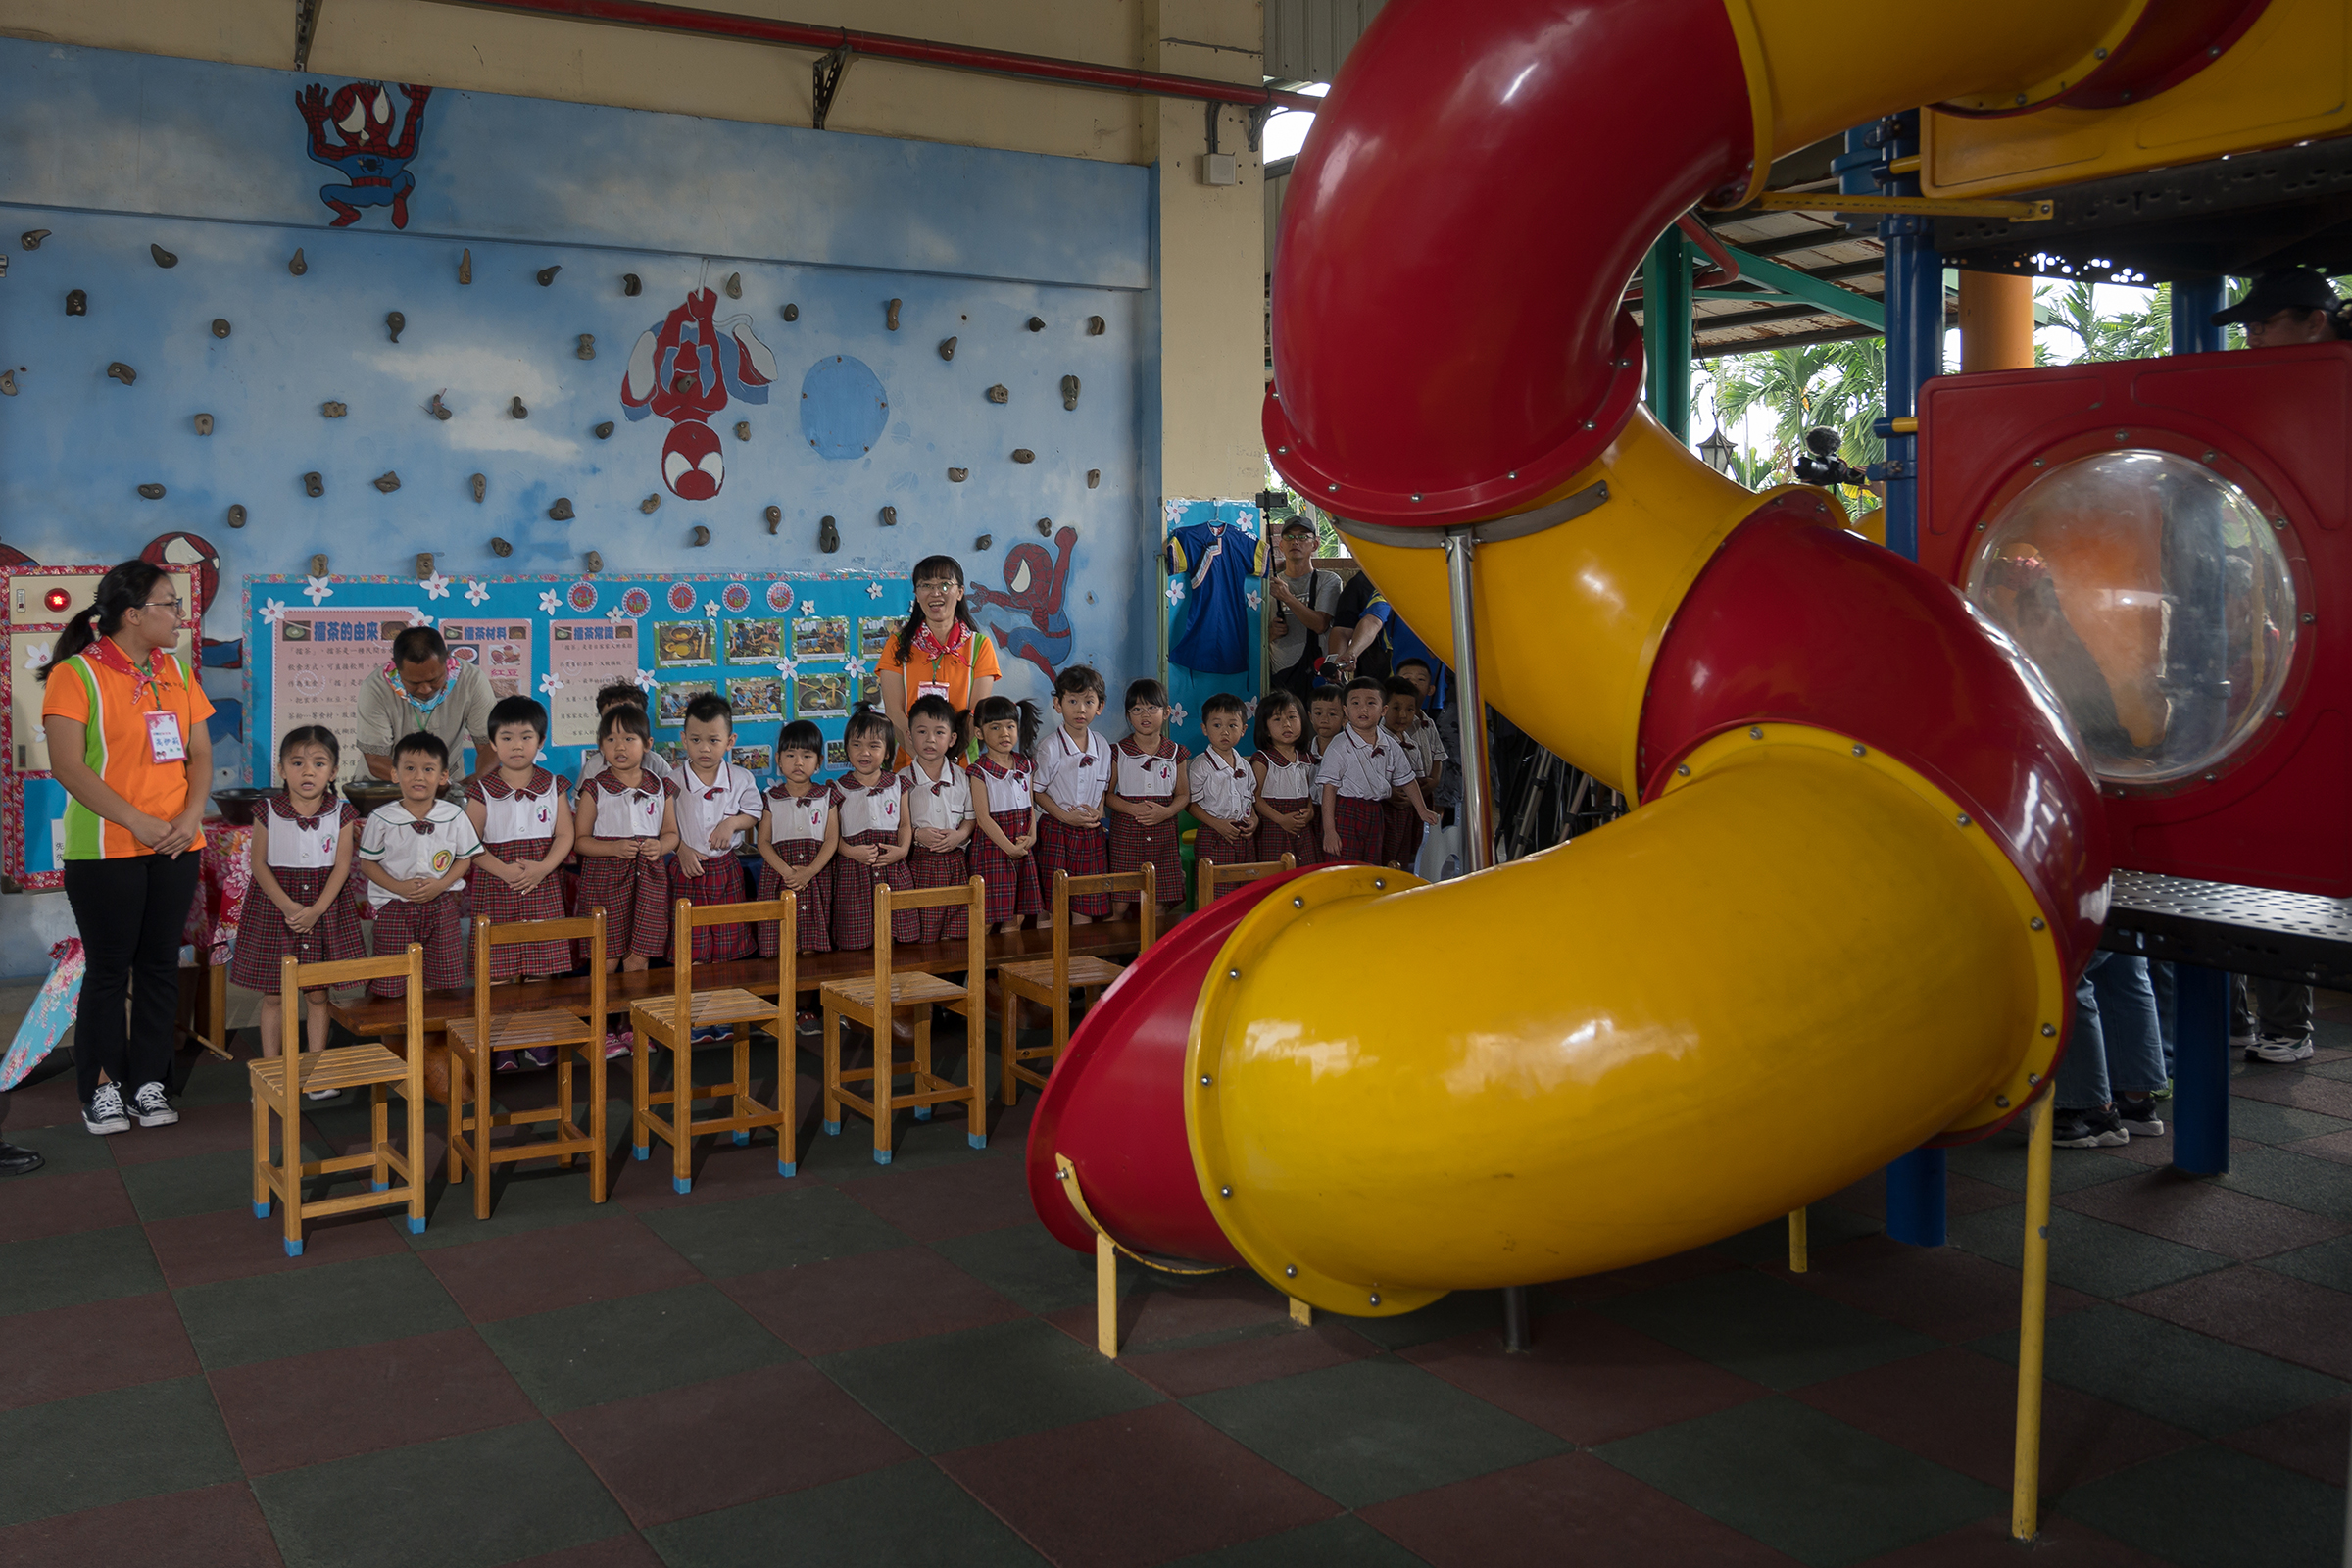 Kindergarten students welcome the President during an Oct. 5 visit. (Billy H.C. Kwok for TIME)